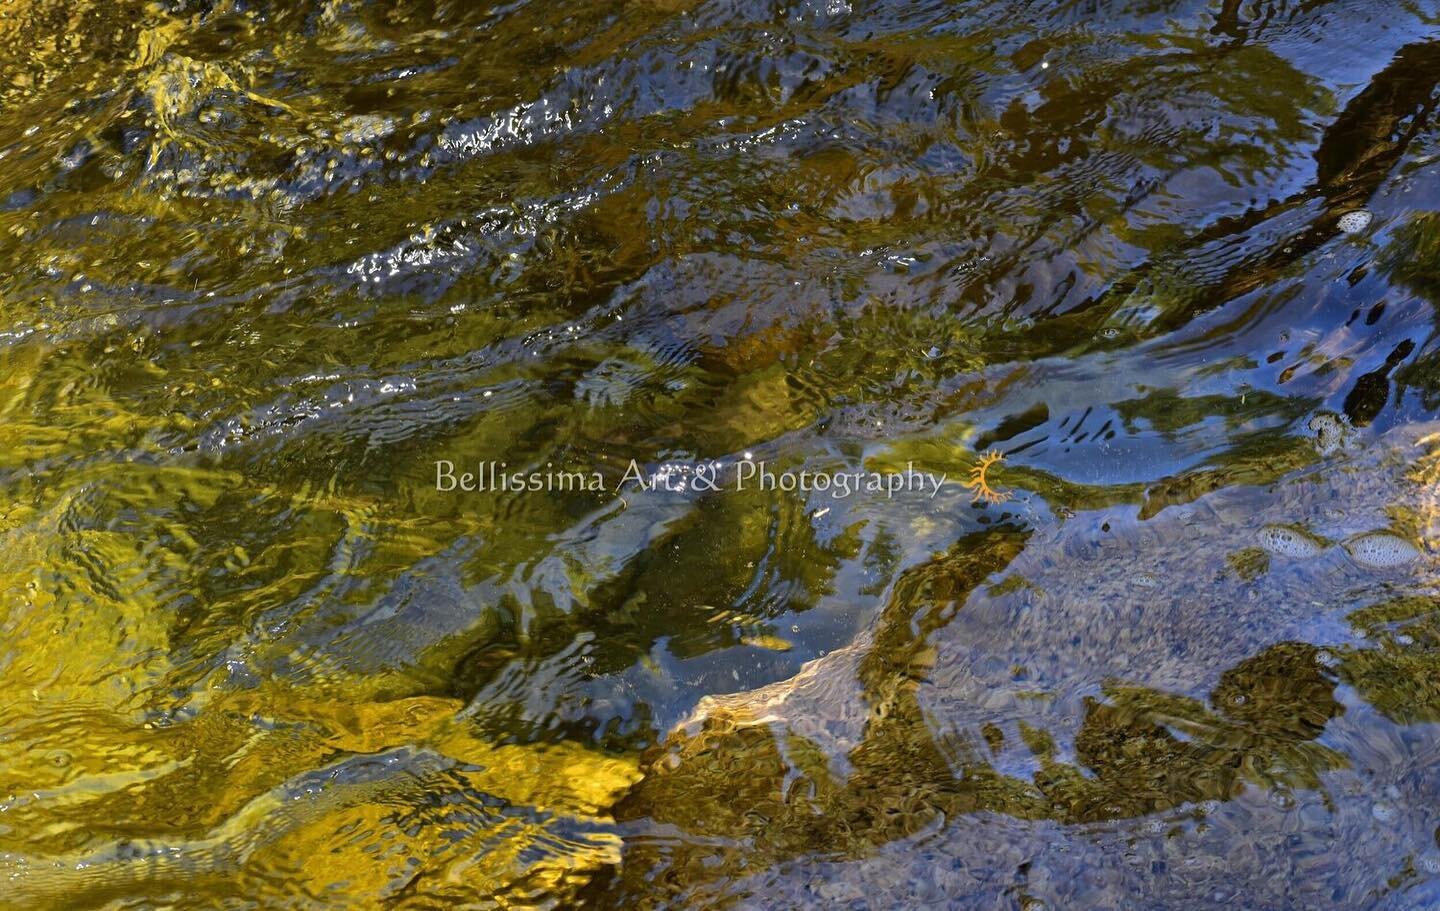 &lsquo;Watercolors&rsquo; 🔸
Purchase at: https://www.bellissimaartphotography.com/shop/p/watercolors
🔸
White Mountains, New Hampshire
Photography Print on Canvas
Taken with Nikon D5600
July of Twenty20
16x20

#photography #art #painting #color #wat